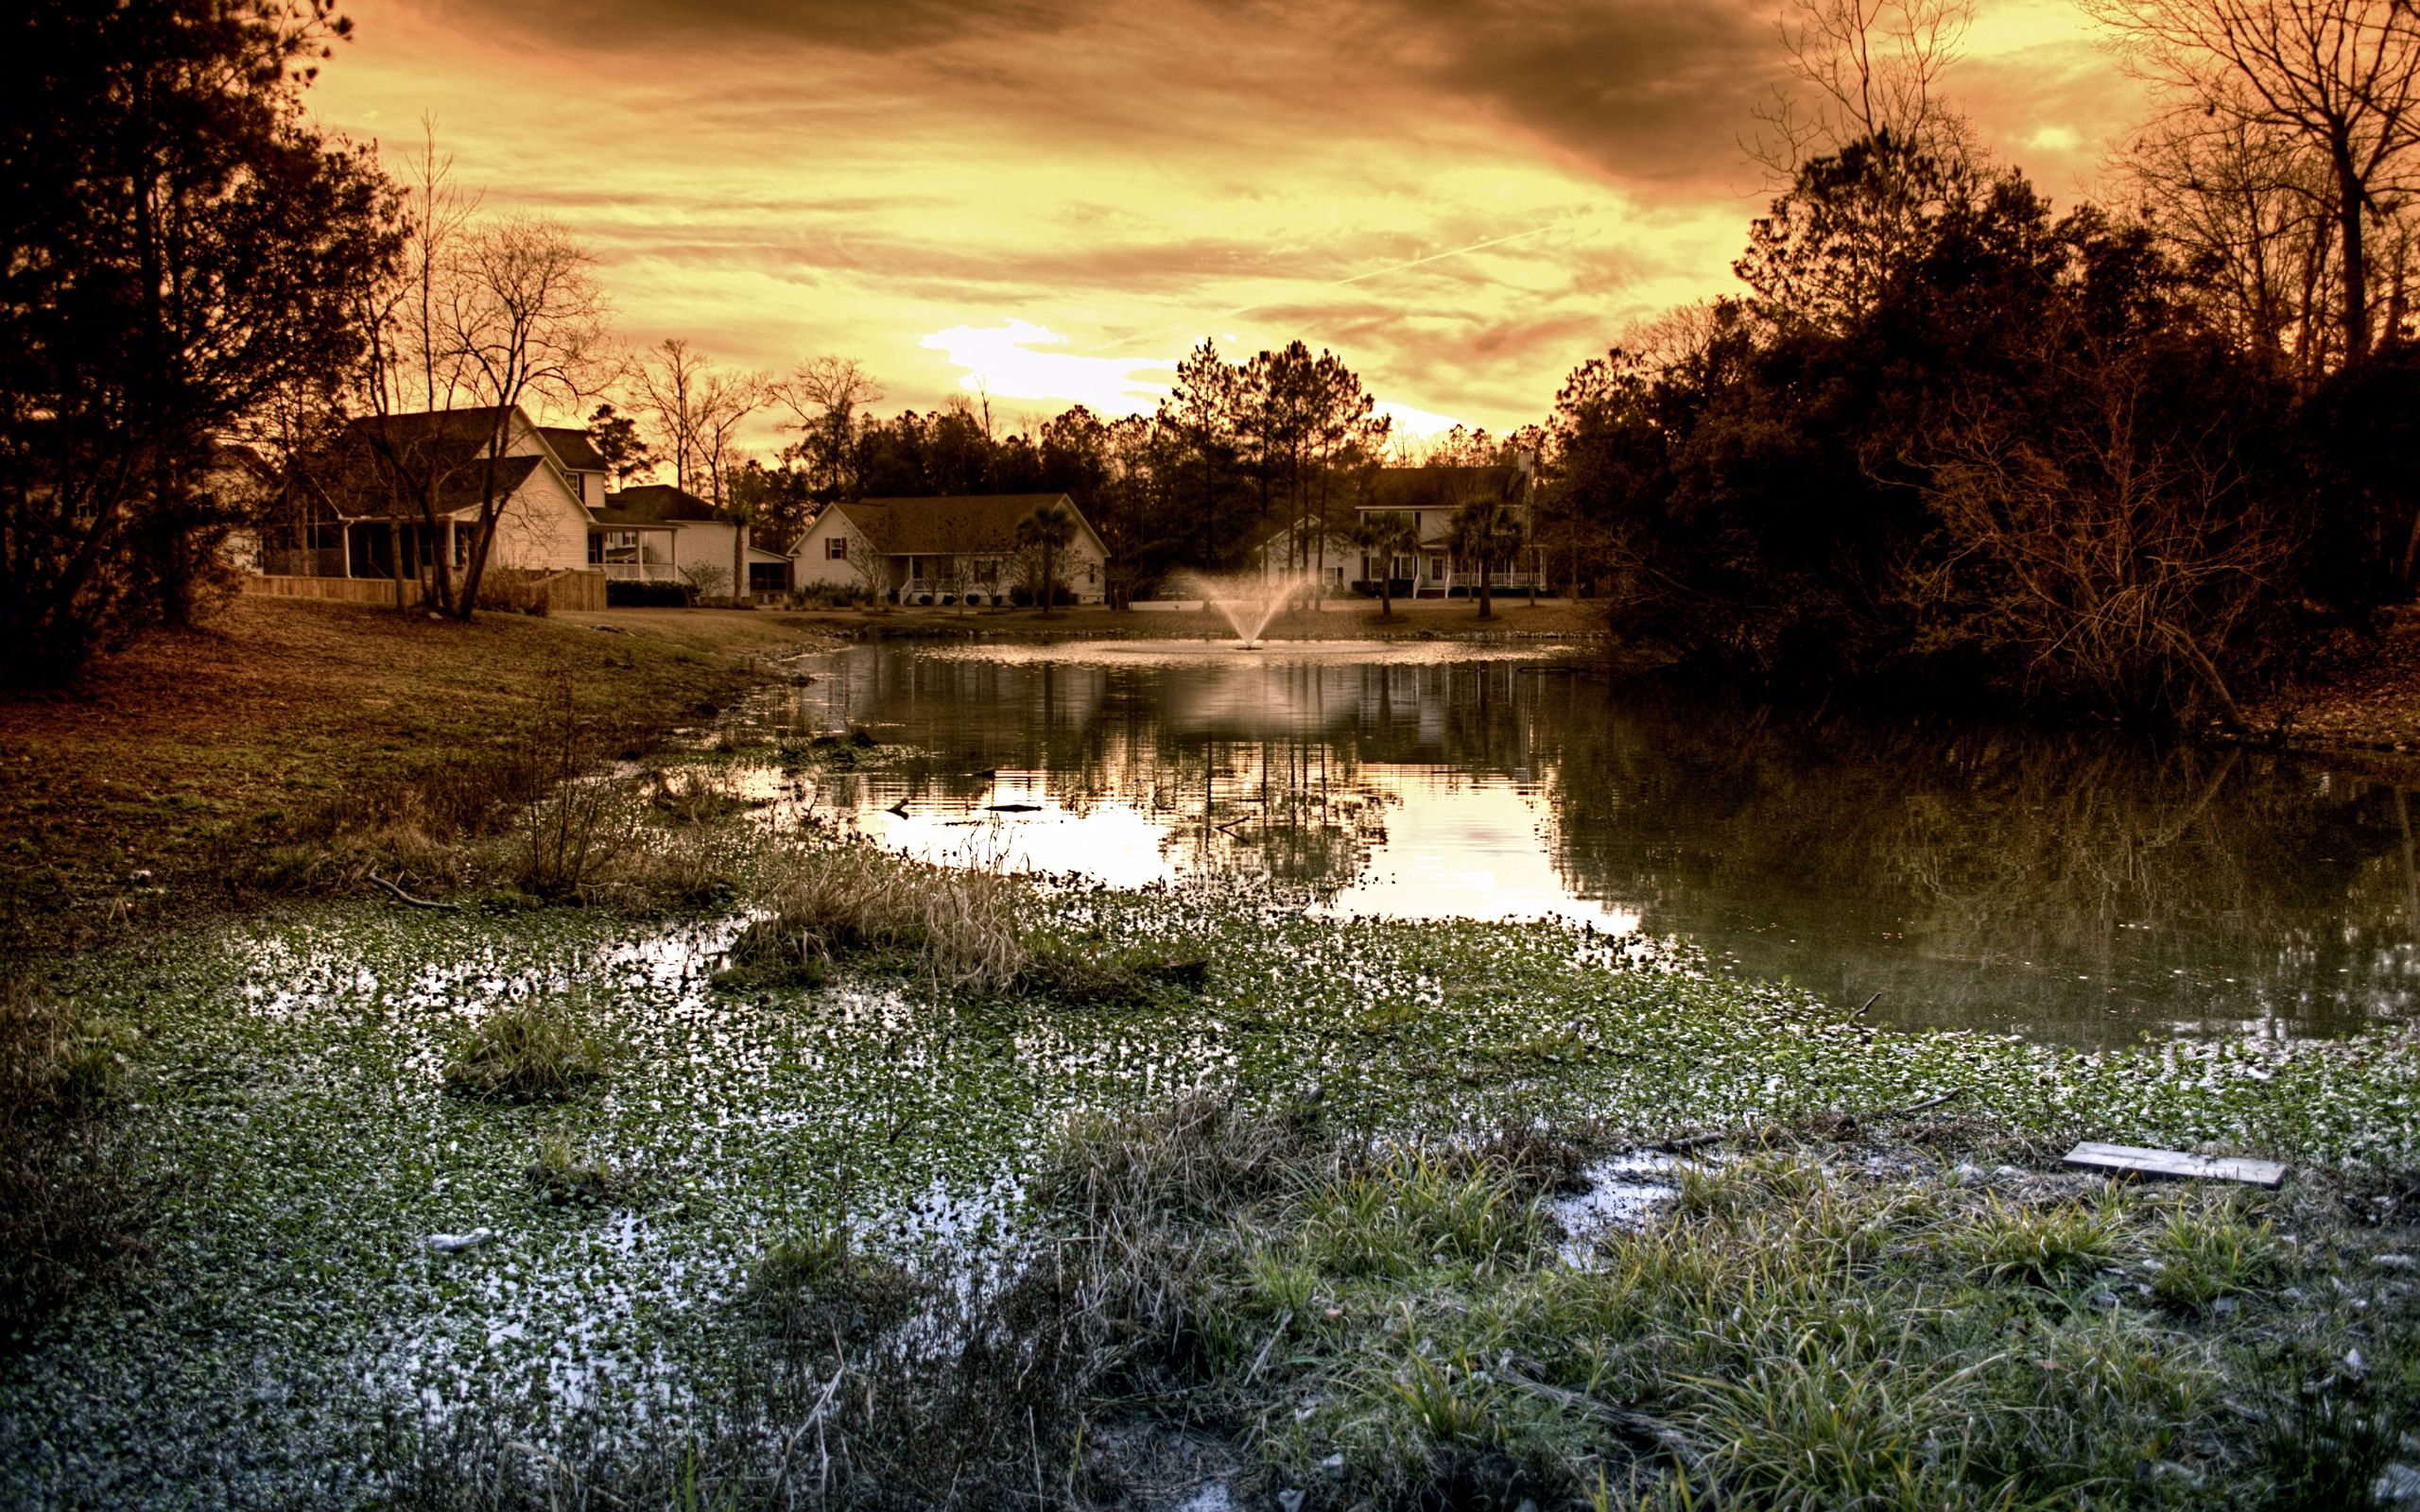 desktop Images nature, houses, fountain, evening, mainly cloudy, overcast, pond